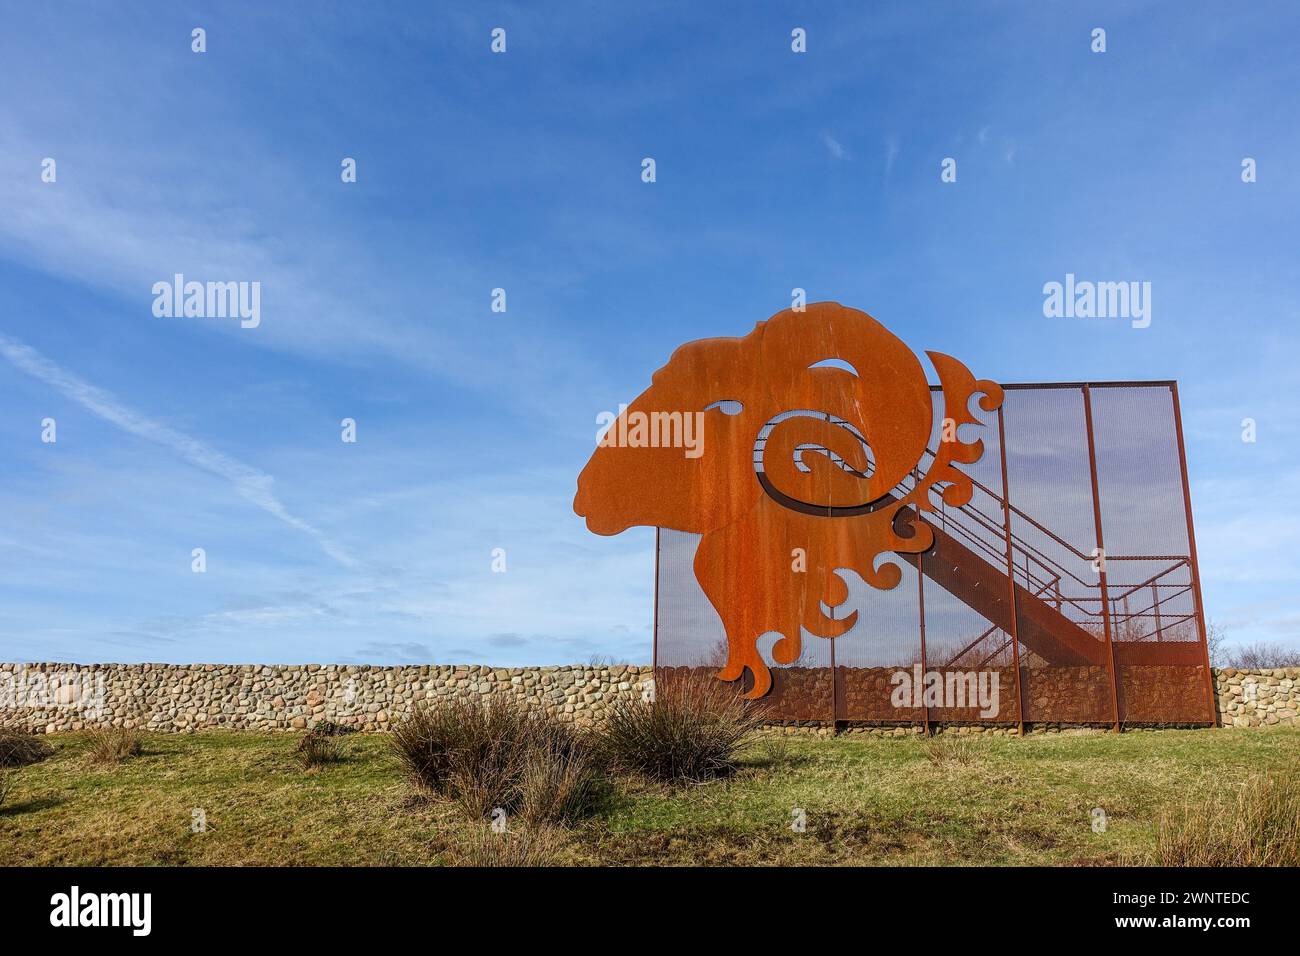 Orange metal ram sculpture in an open field against a blue sky with low stone wall in the background, taken in the Dwingelderveld national park, NL Stock Photo